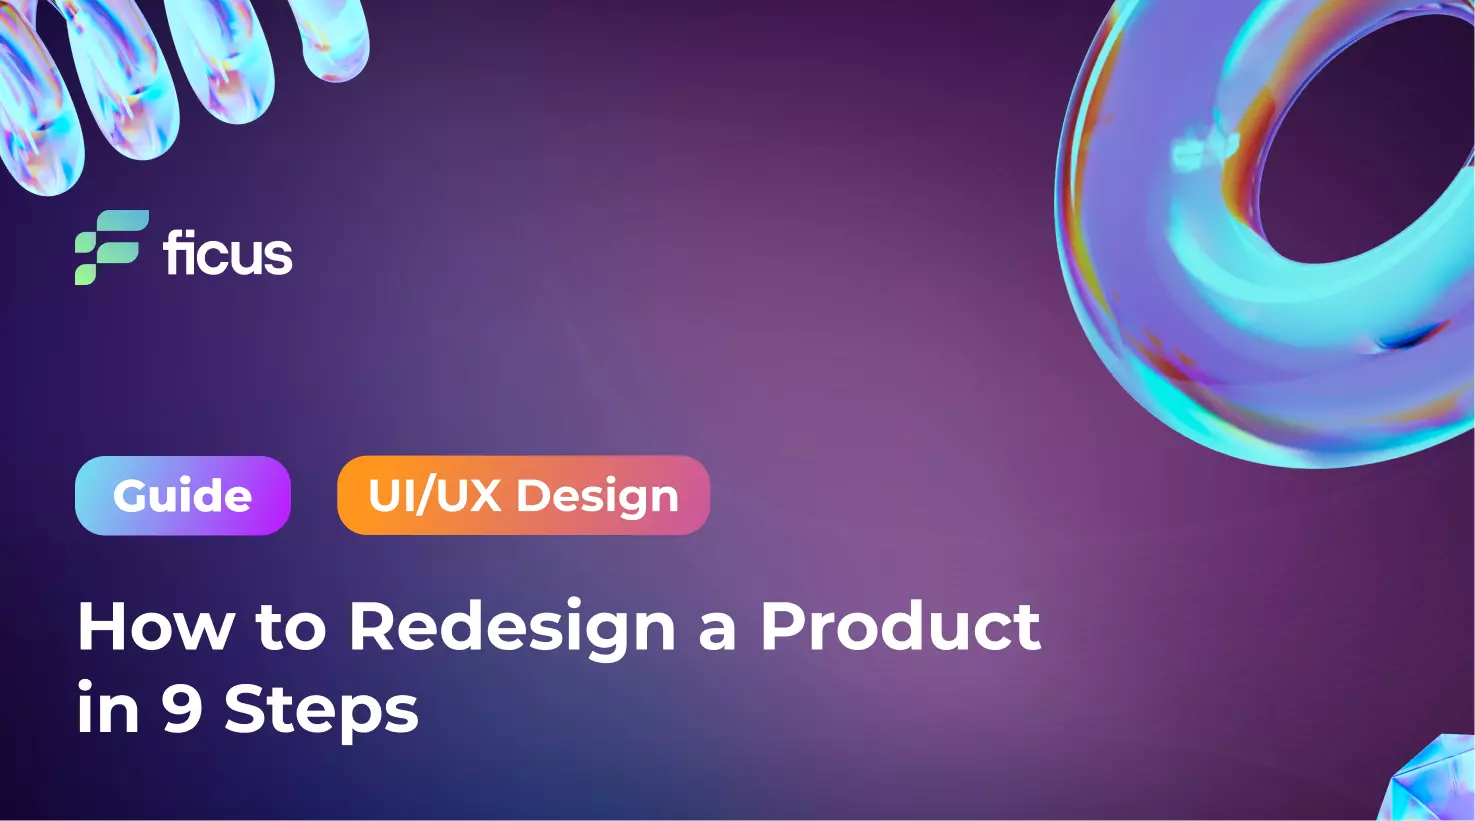 7_How to Redesign a Product in 9 Steps